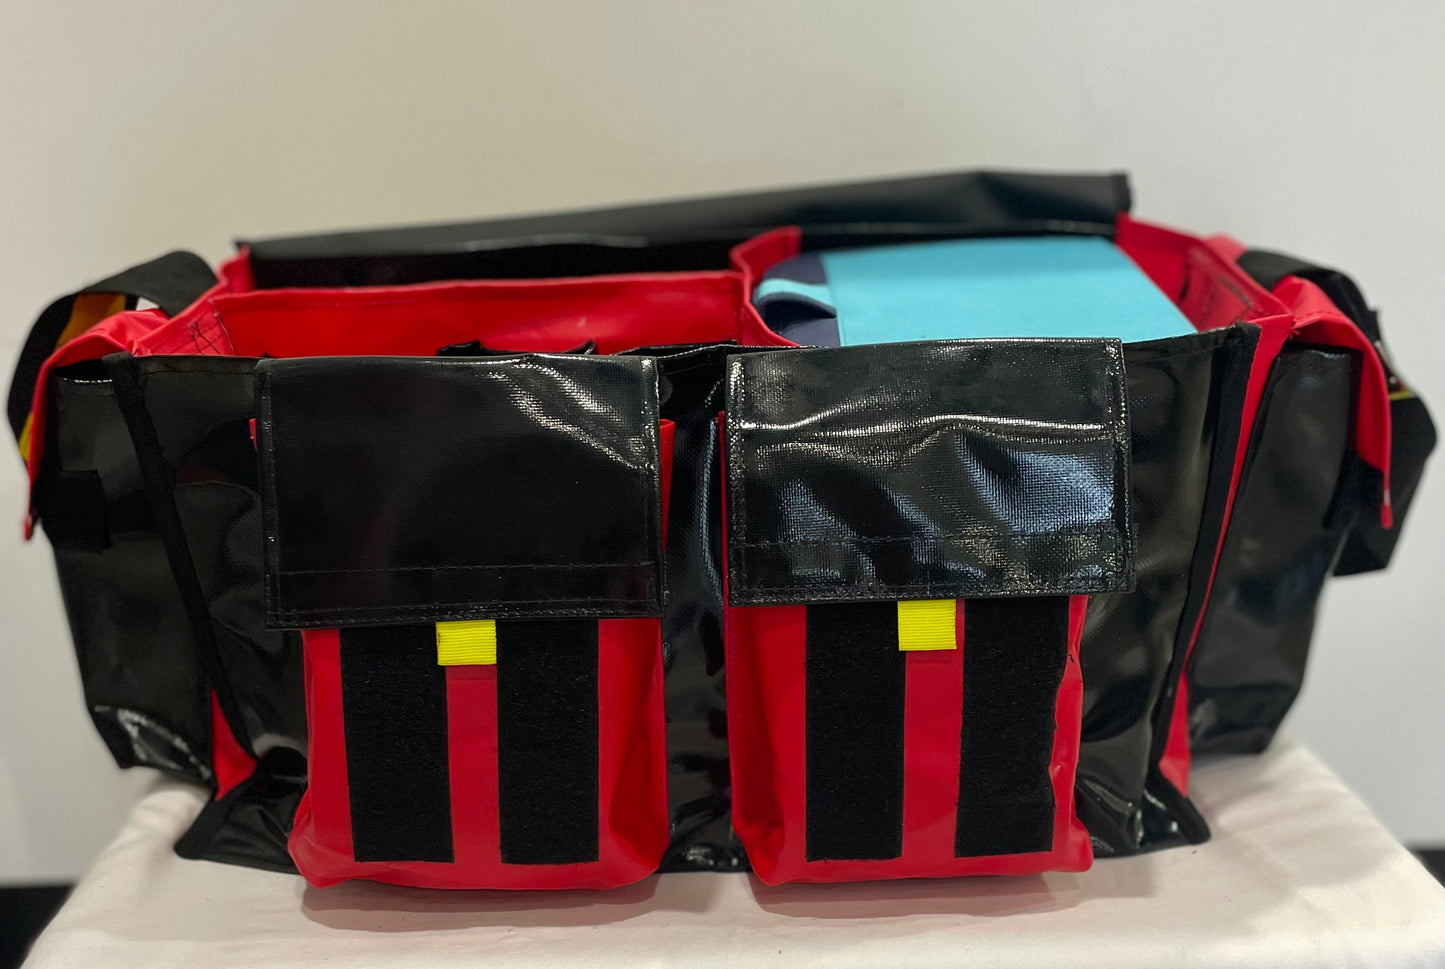 CribBags Extra Large Black and Red Crib bag. Tough Vinyl Construct 4 pockets outside, 3 pockets inside.